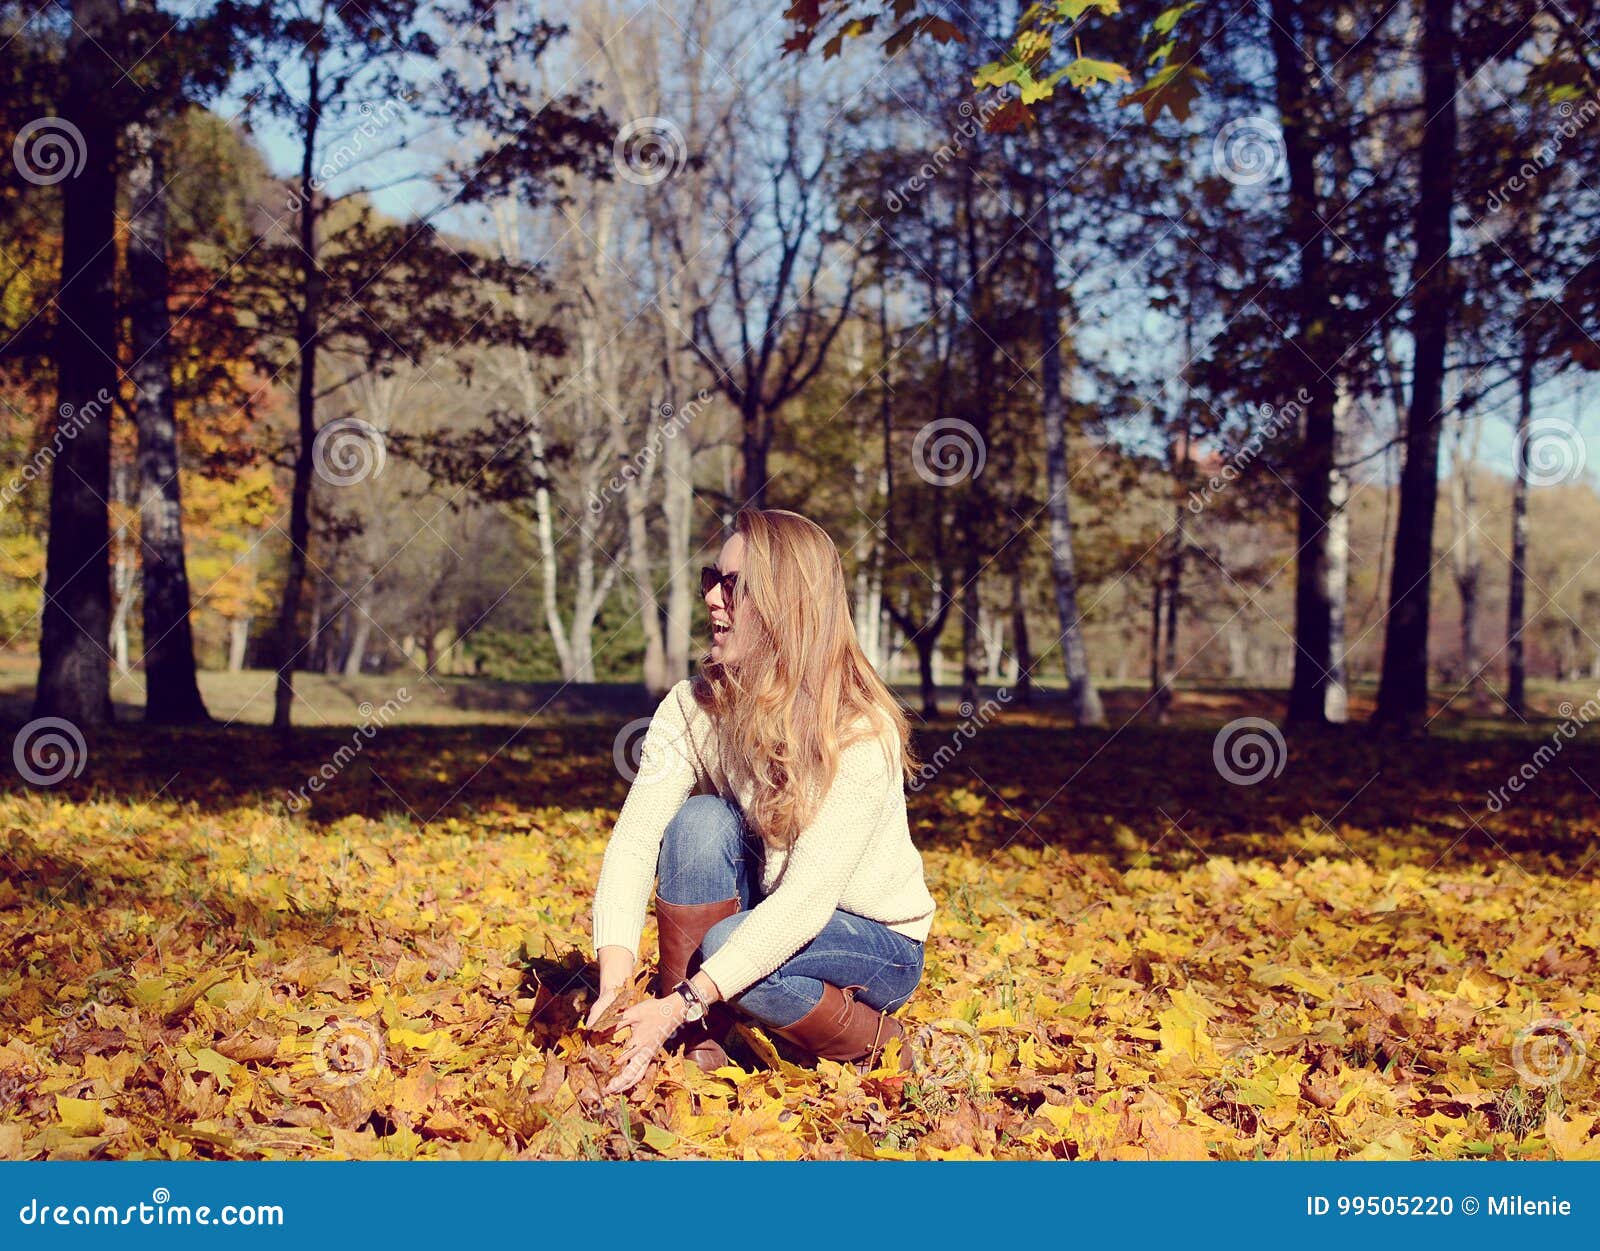 Happy Young Woman Walking in Park Stock Photo - Image of lifestyle ...